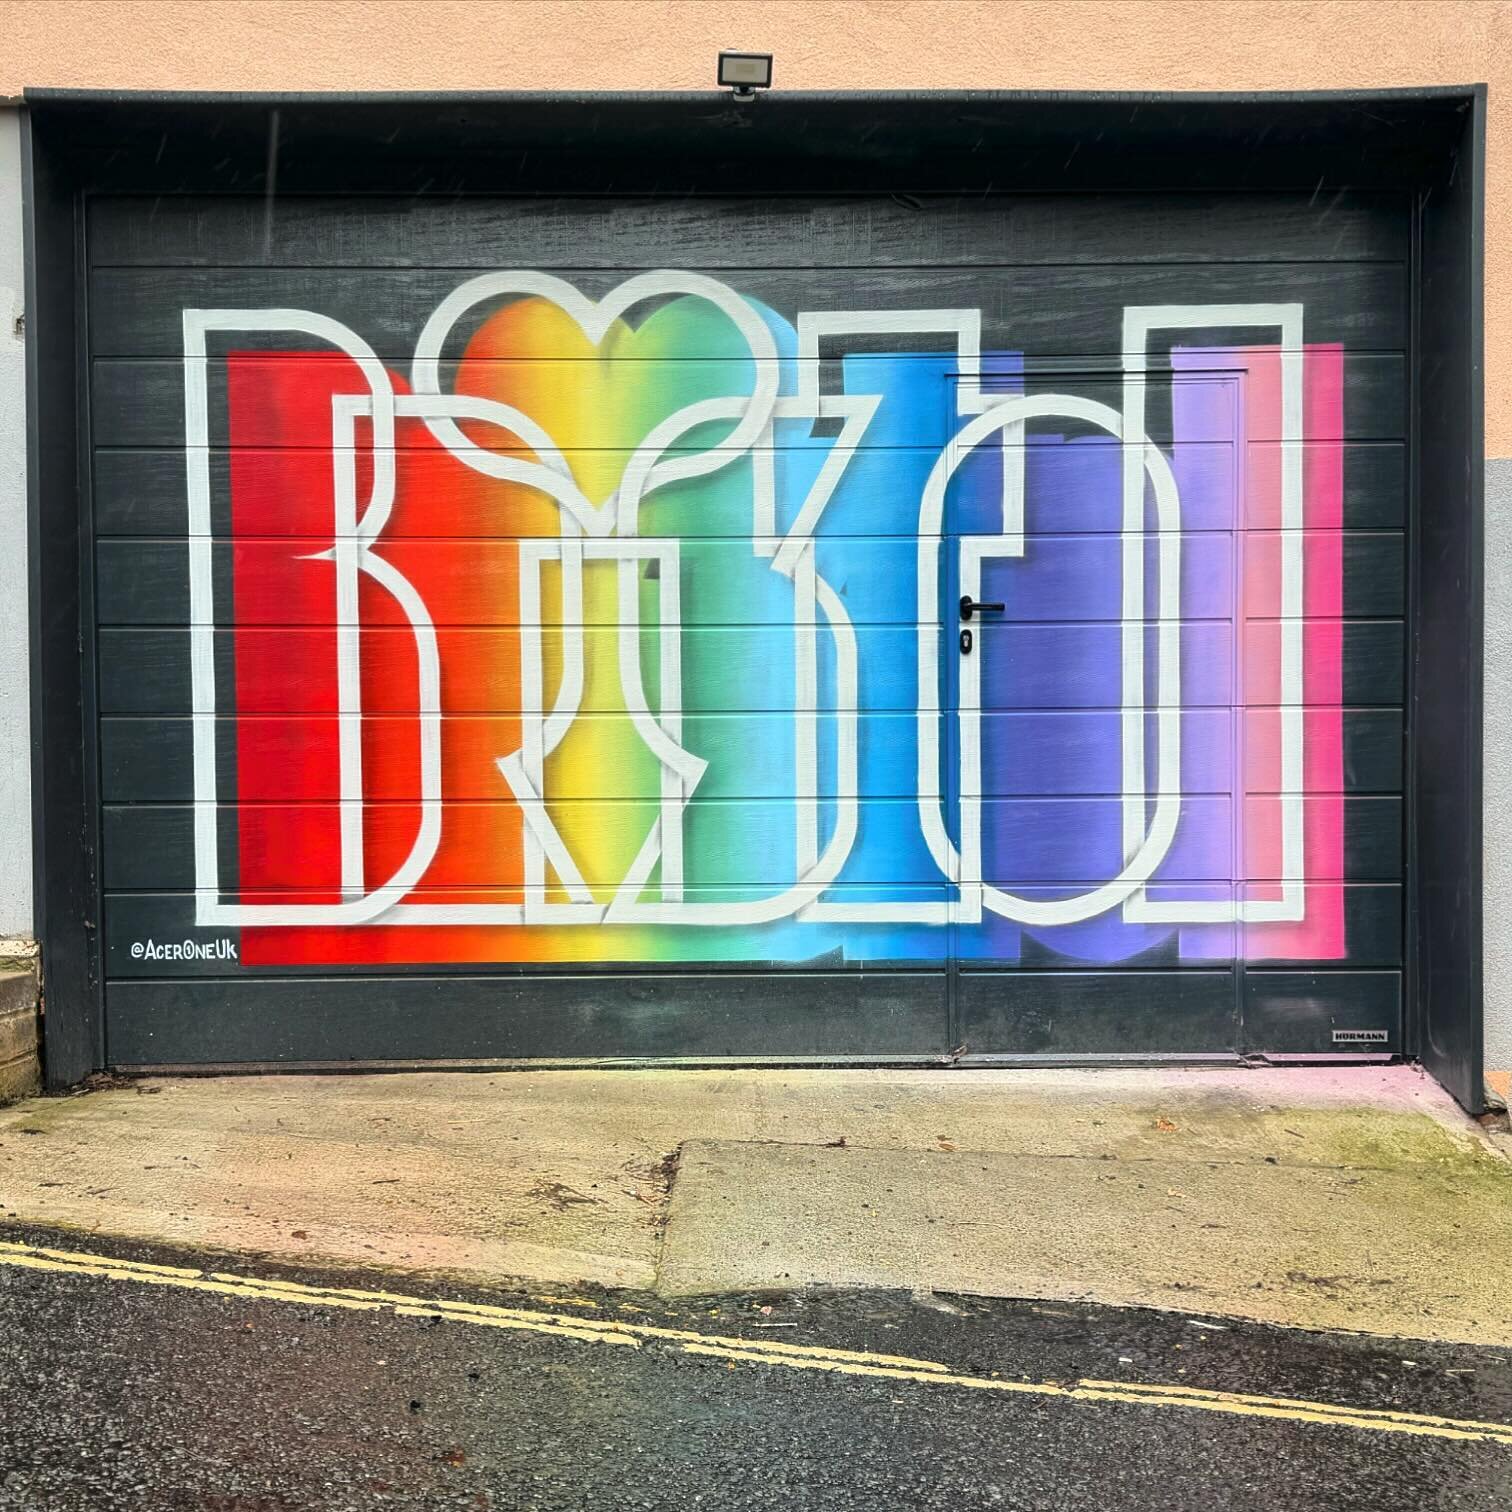 &lsquo;Bristol&rsquo; - Hill St, Bristol. March 2024.
This one&rsquo;s for my friend @nicolawalther who runs the @theorangetreehub on Park St, a very cool space that will work brilliant for some @collaborativepaintinguk sessions. Grab your brushes an